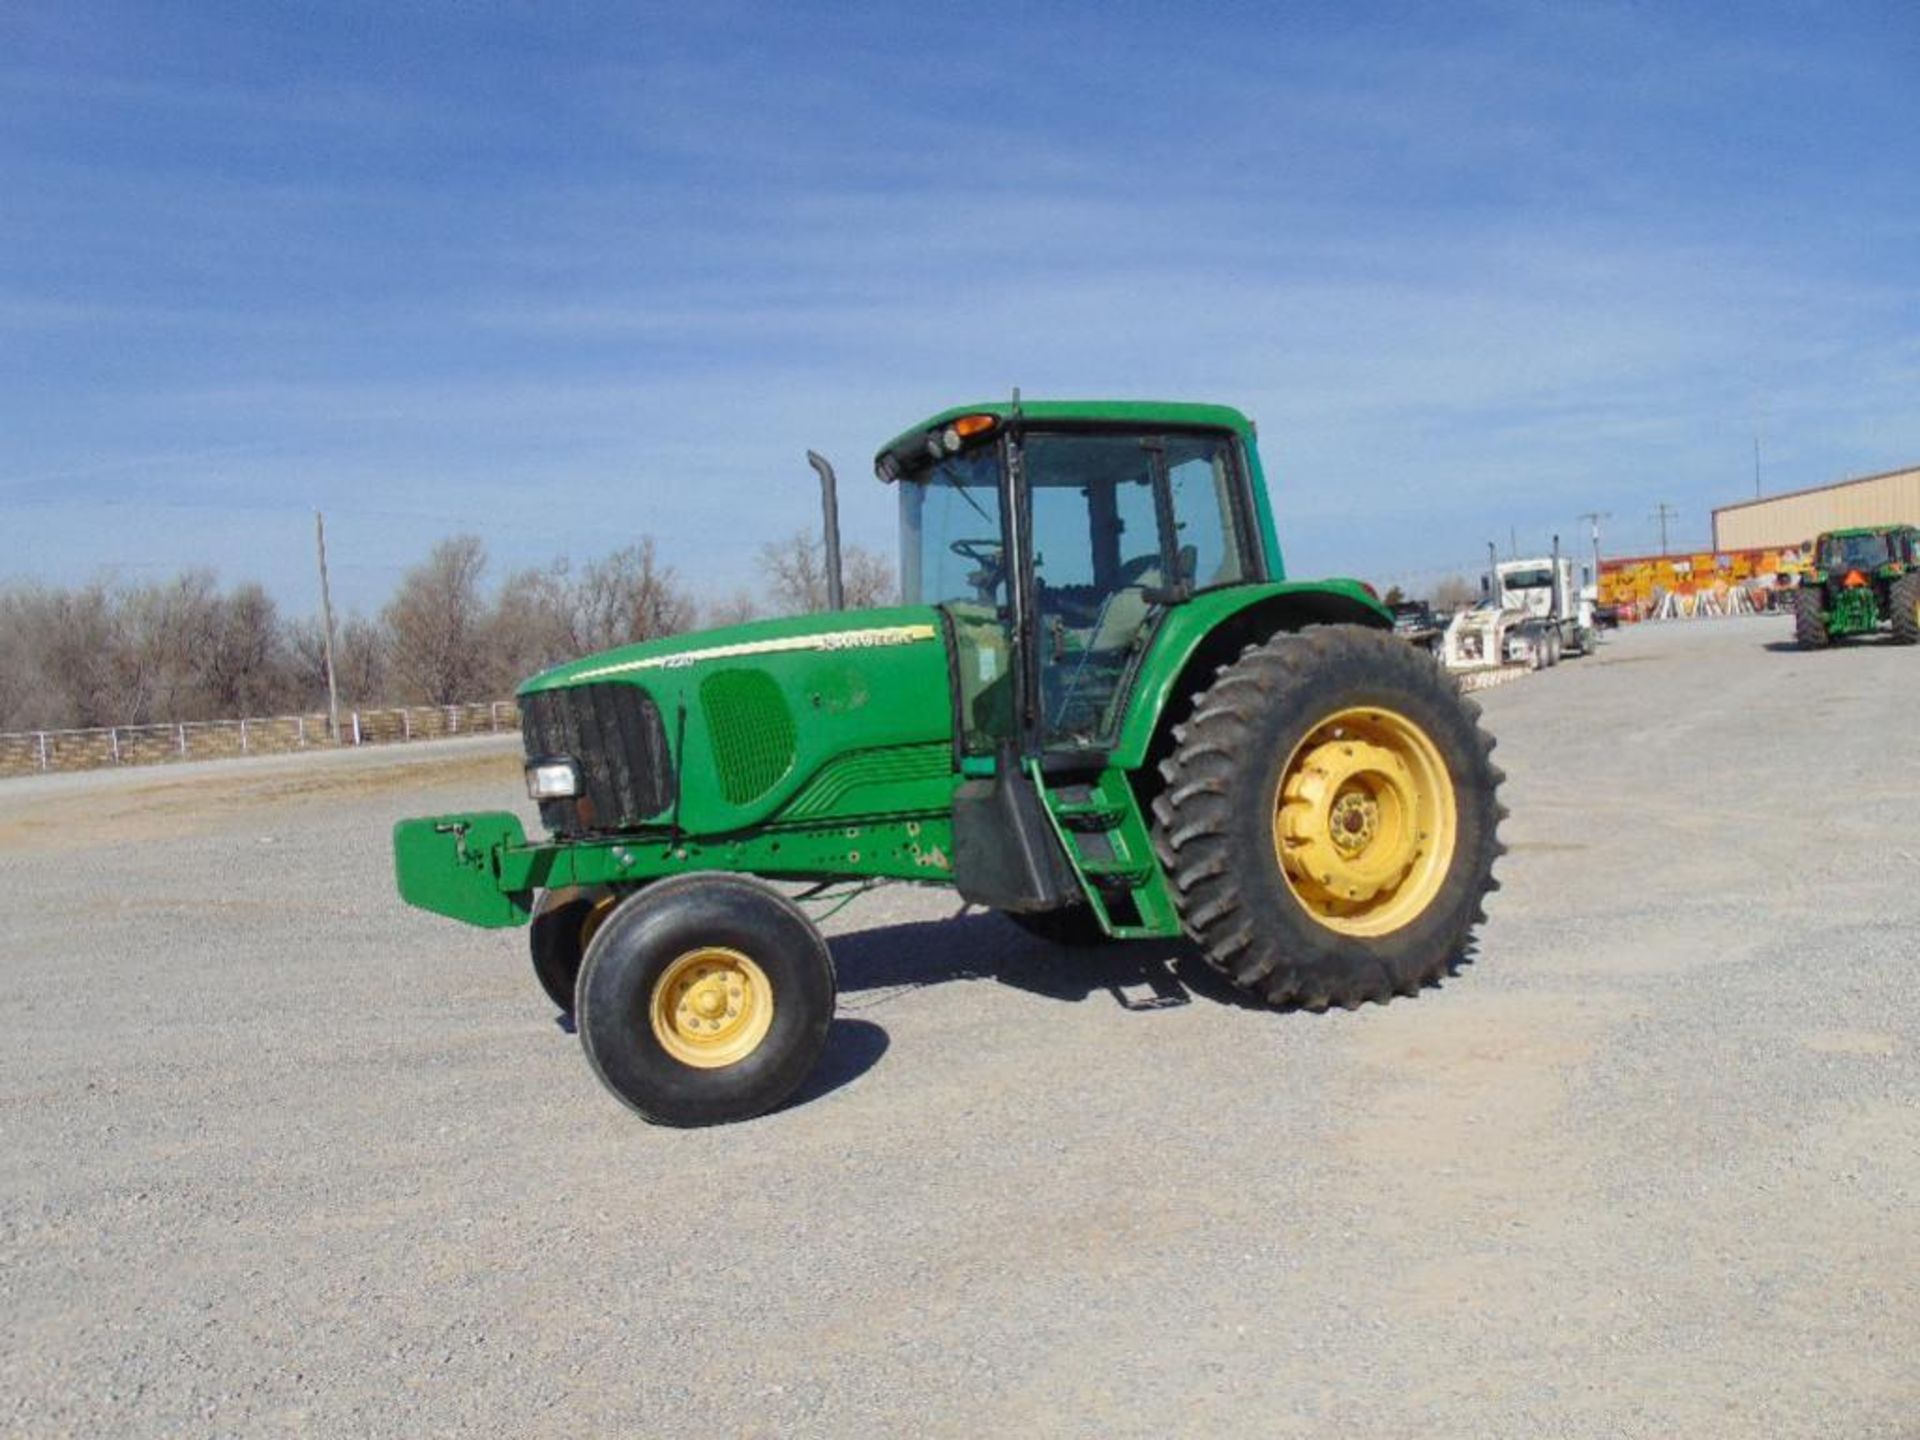 2005 John Deere 7220 Farm Tractor s/n 034661 Cab, a/c, 3pt, pto,hyd outlets, 4732 hrs